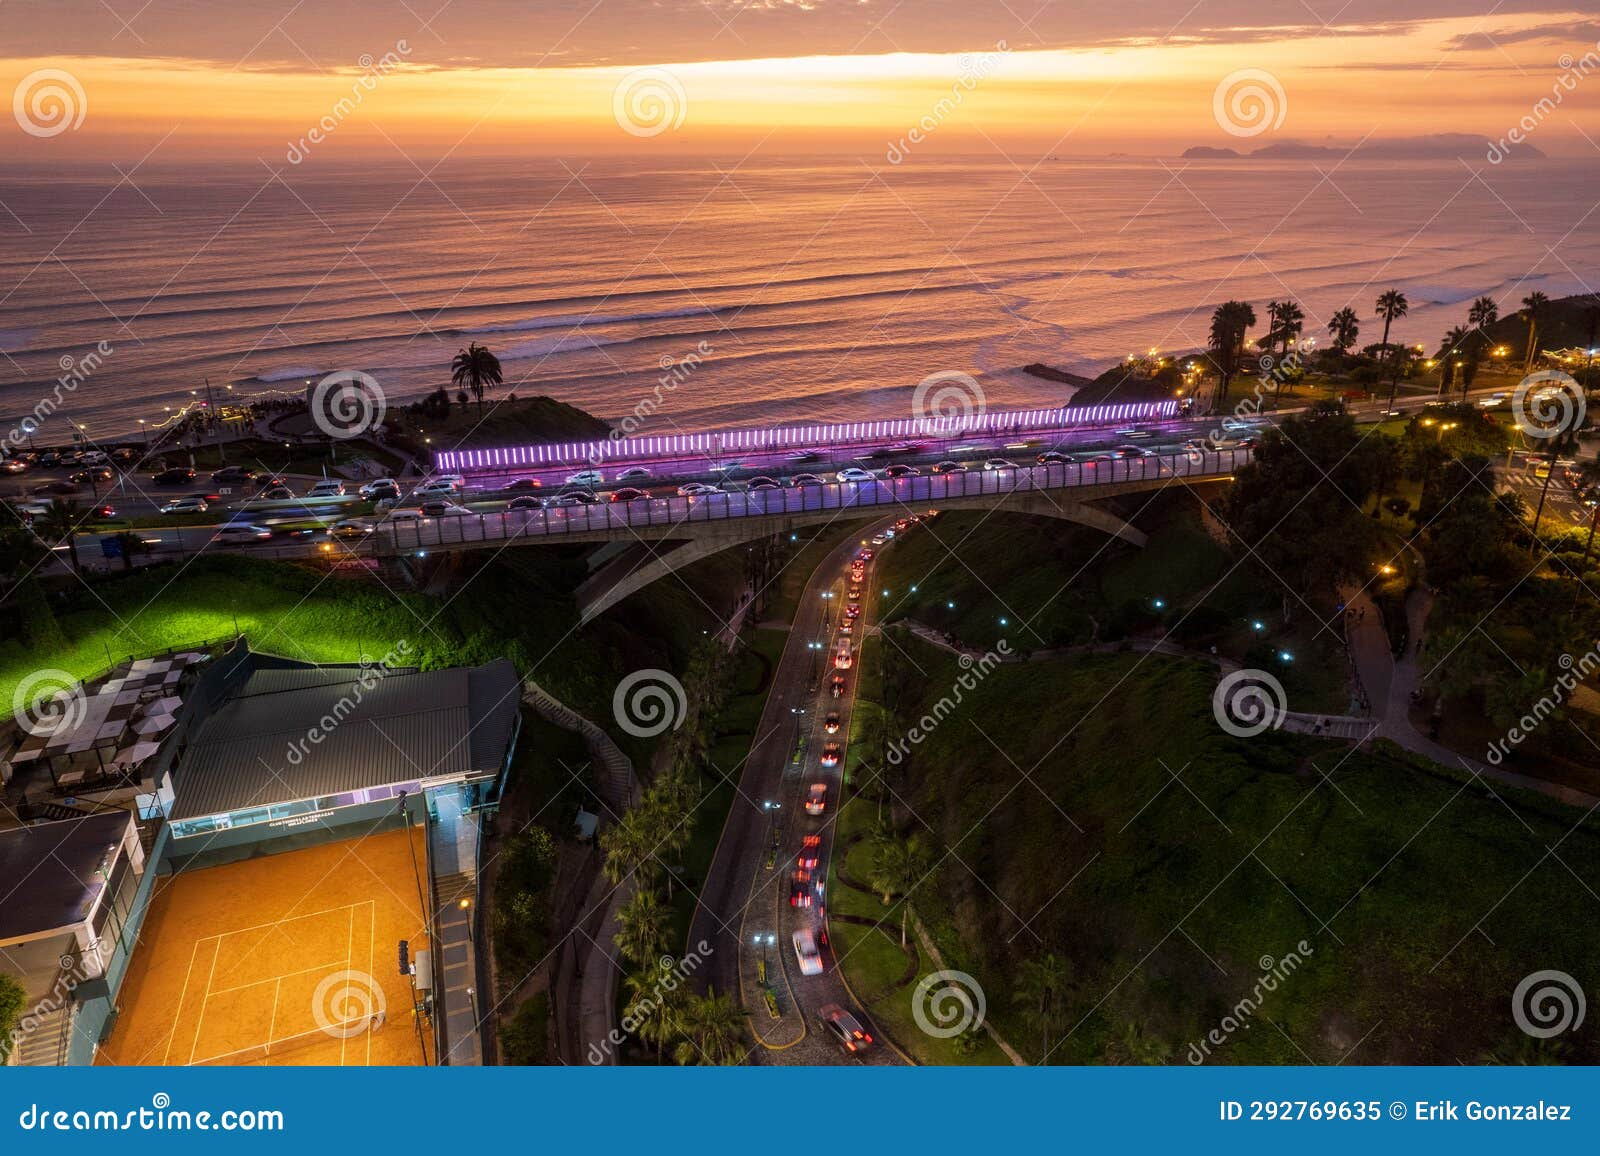 sunset view from la bajada de balta in miraflores, in the city of lima